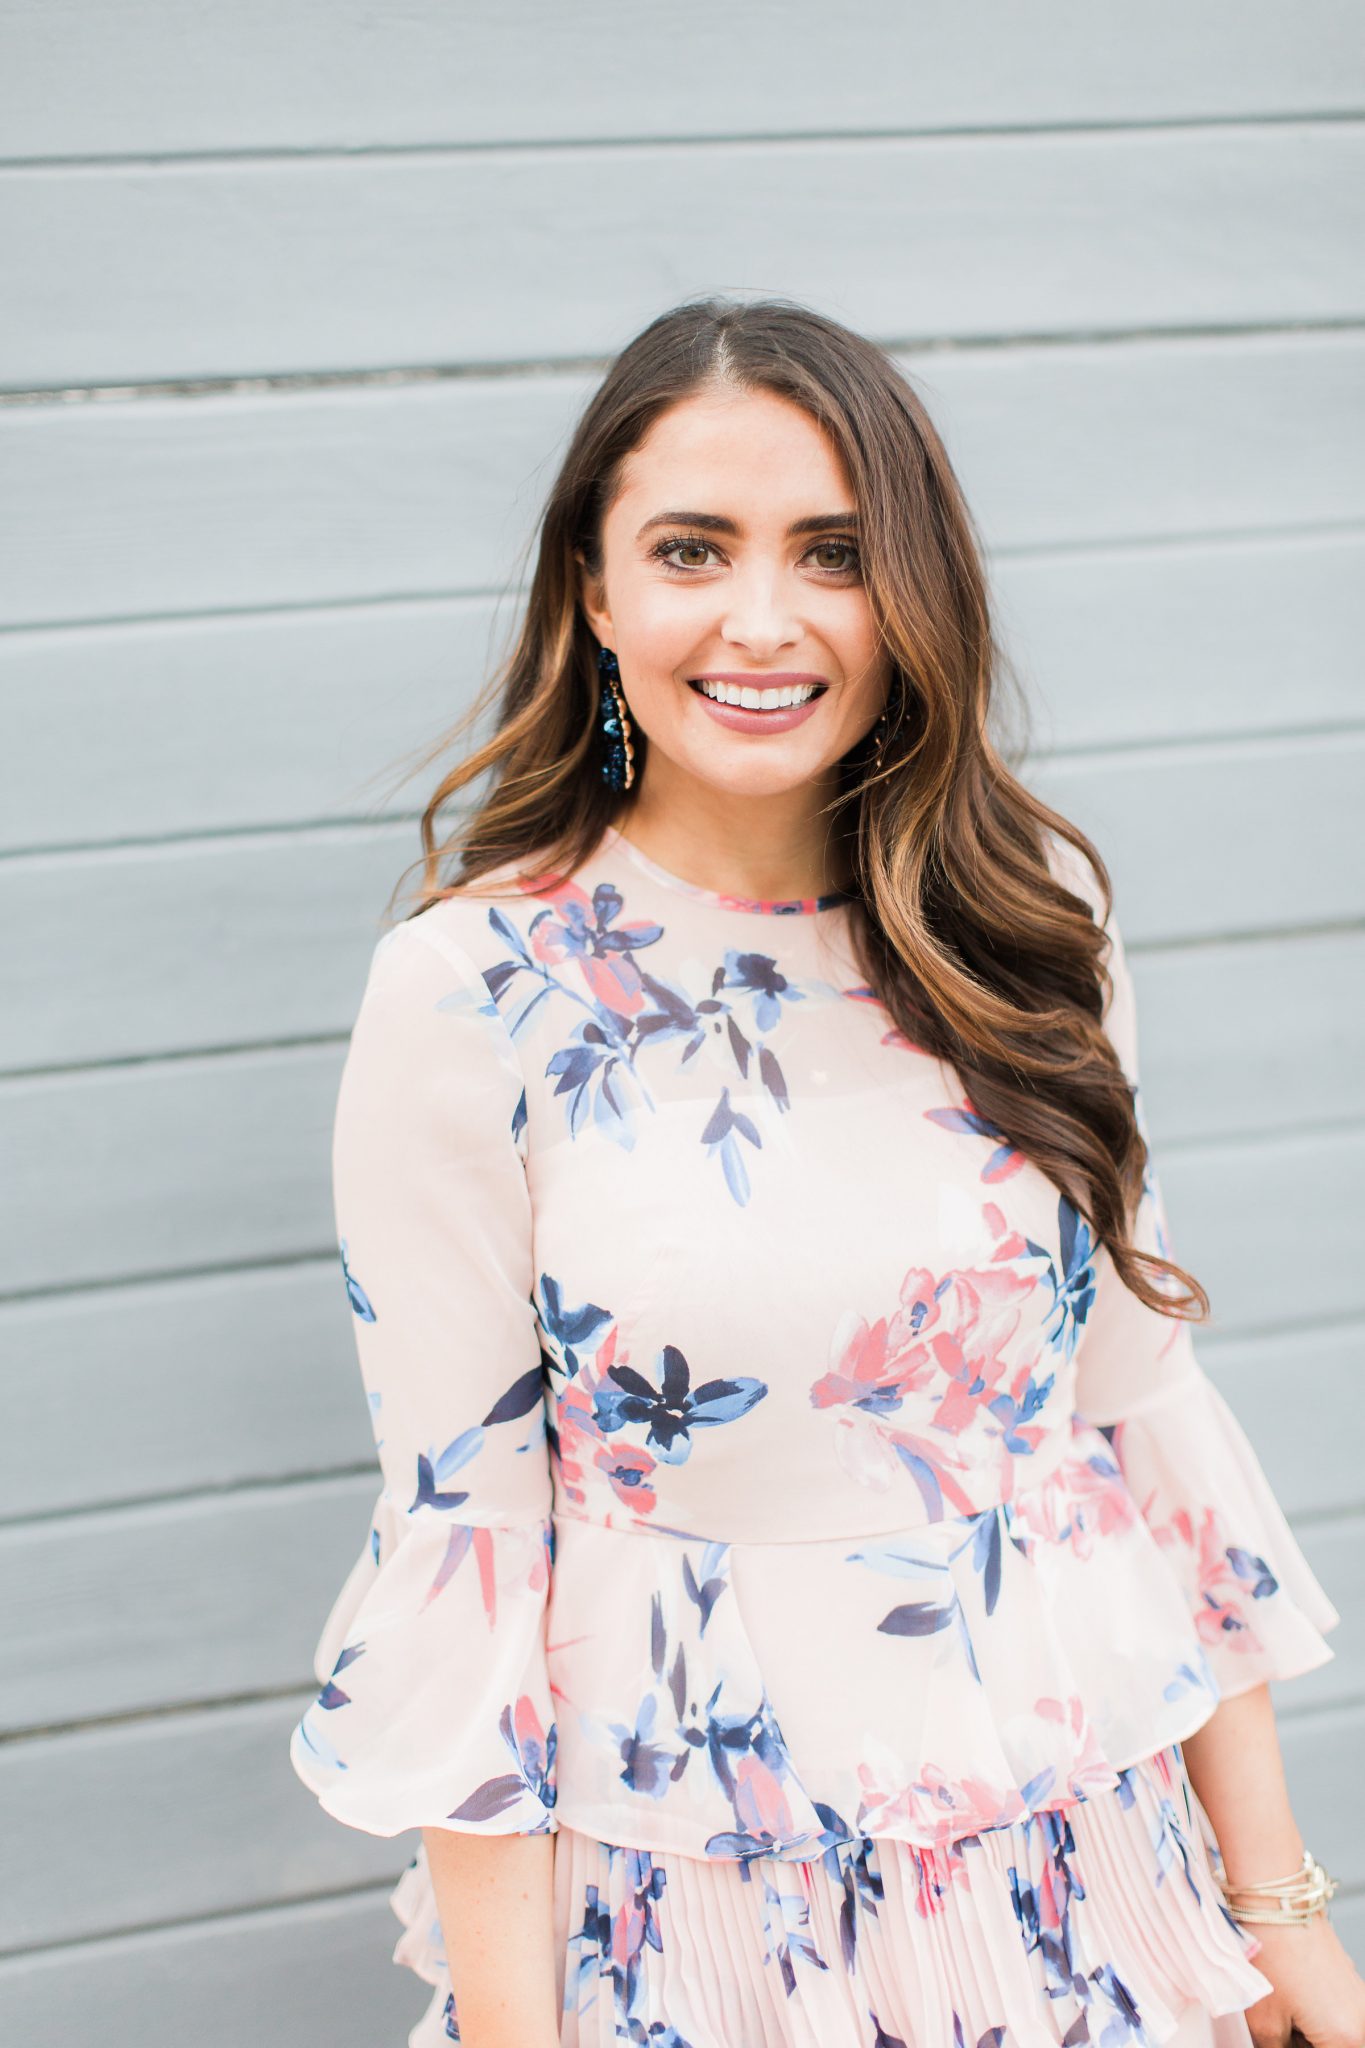 Pink floral tiered dress - My Favorite Cute Easter Dresses by popular Orange County fashion blogger Maxie Elise